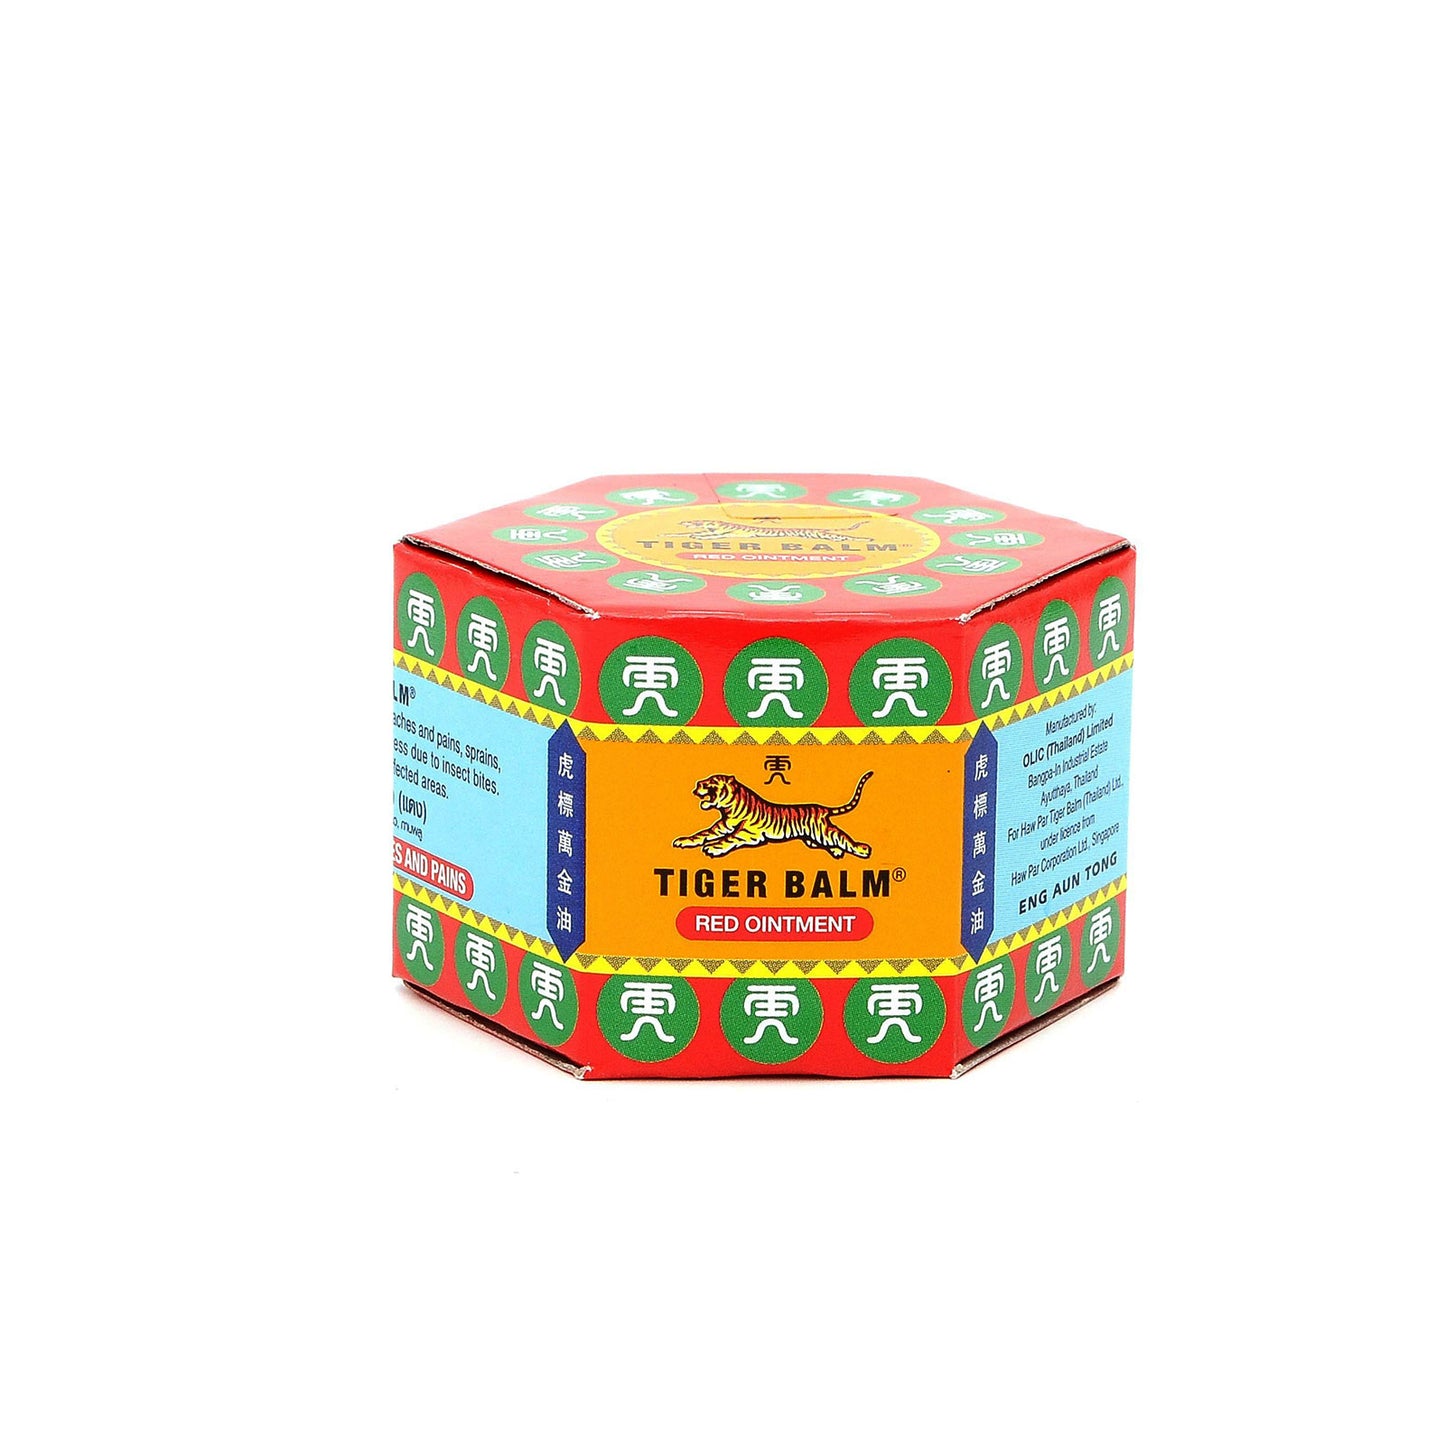 Tiger Balm Red Ointment - Tried & Tested Home Remedy Favorites For The Entire Family